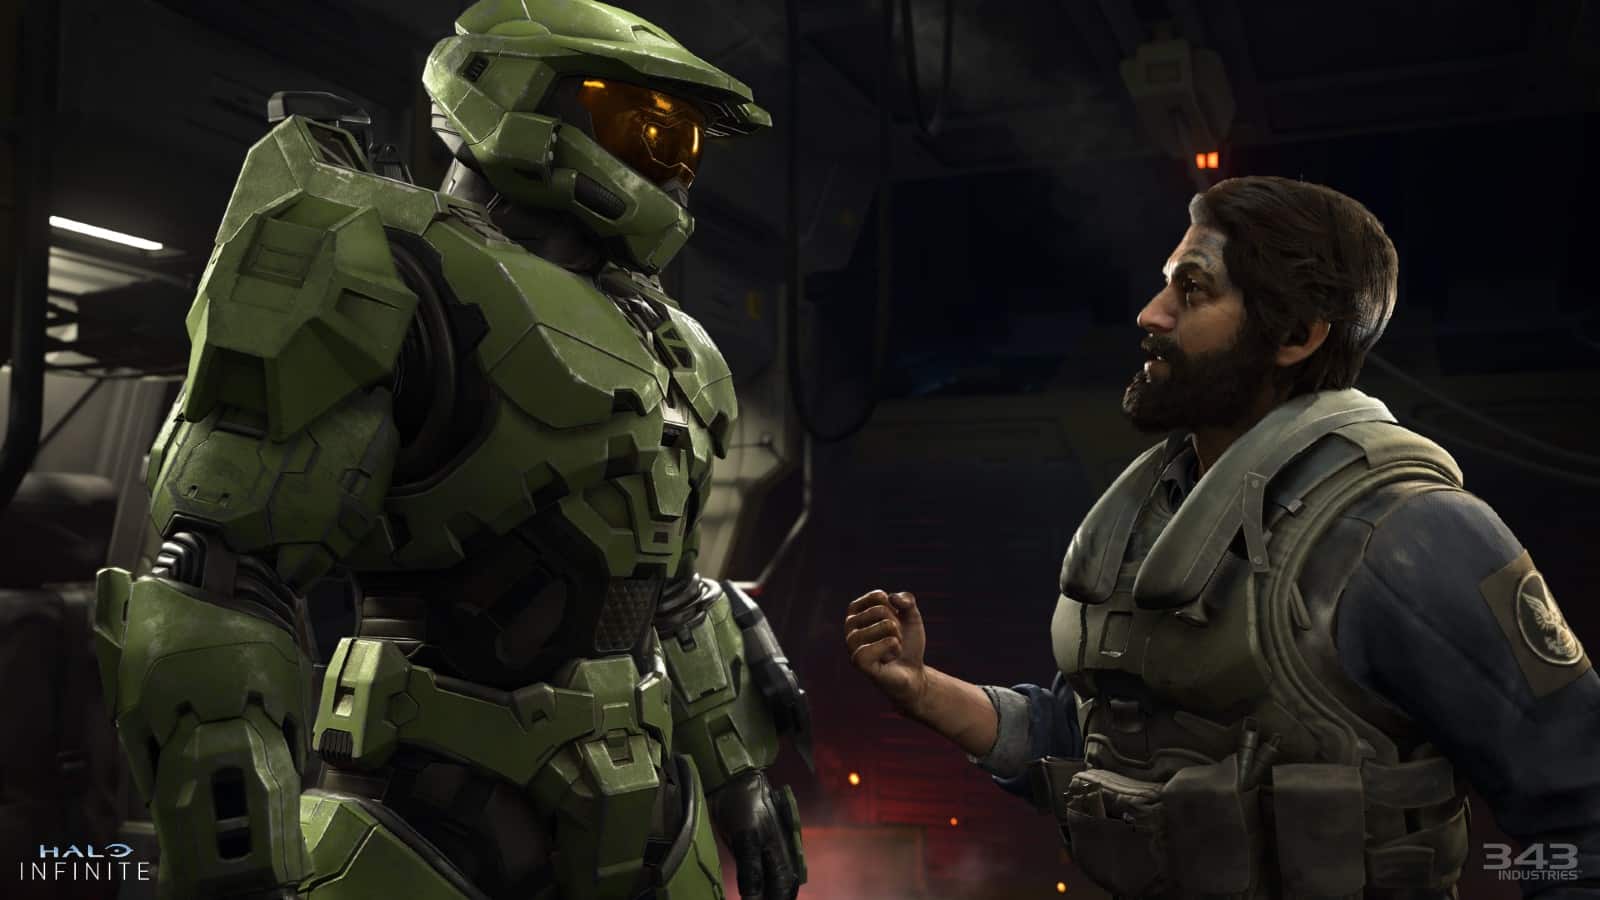 Master Chief and The Pilot having a heart-to-heart in the Halo Infinite campaign trailer